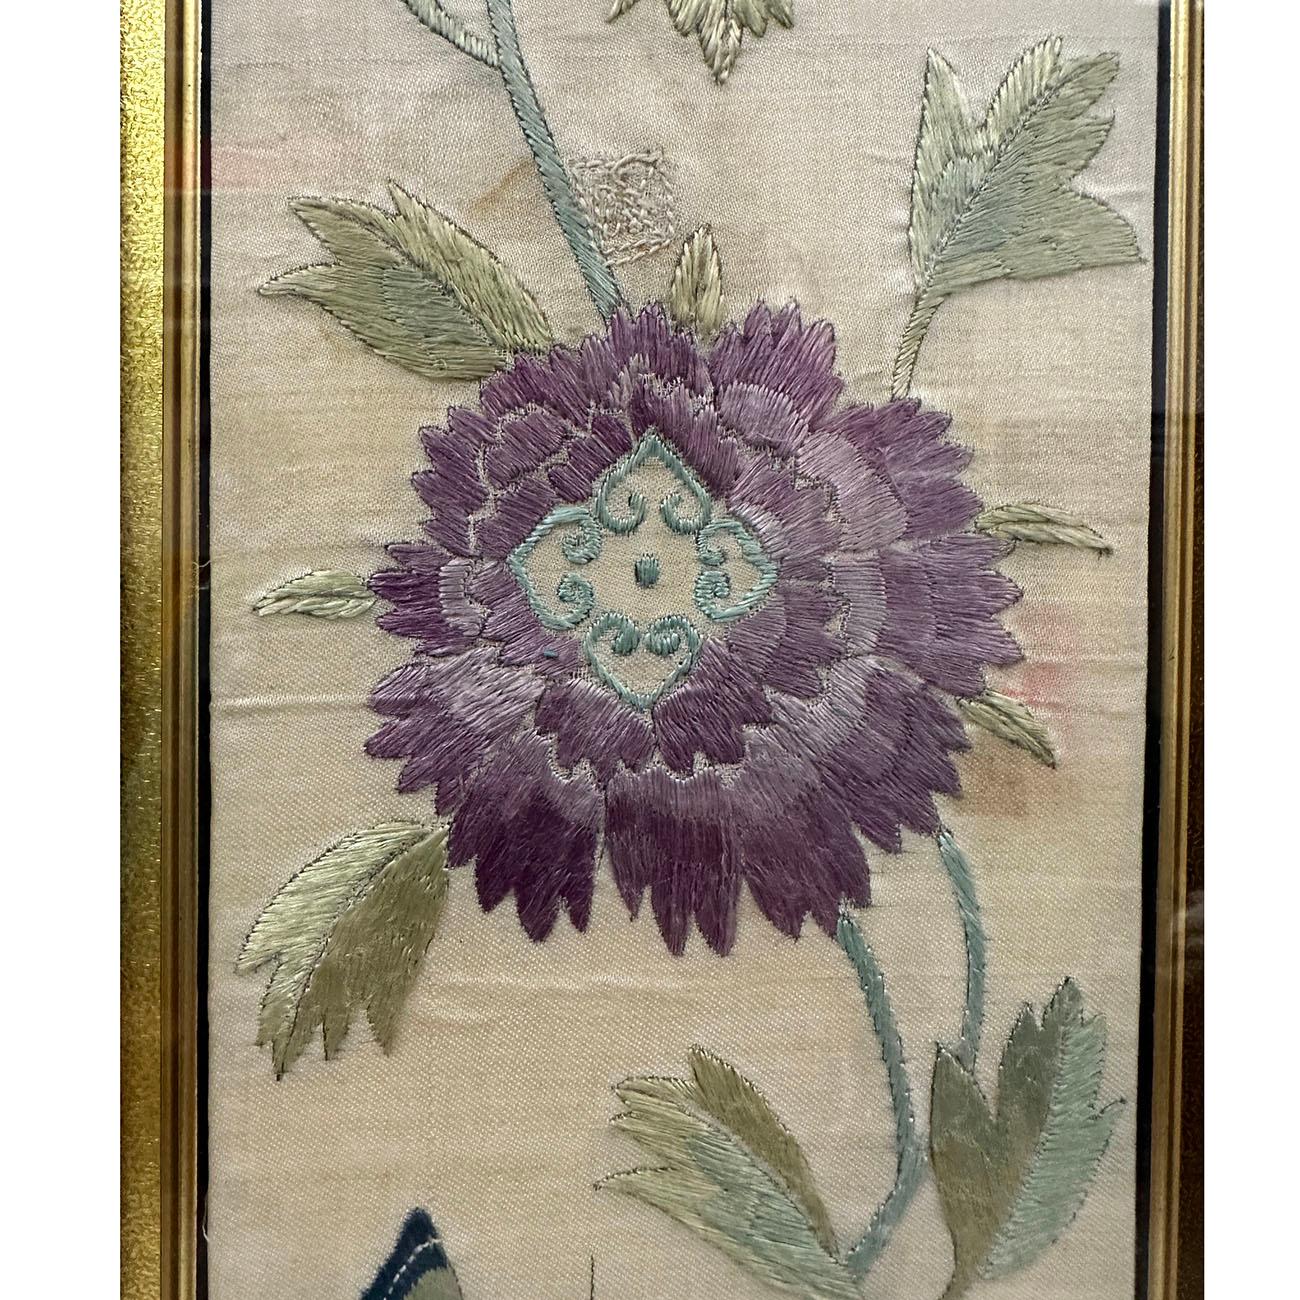 Chinese Export 19th Century Antique Chinese Framed Silk Embroidery Panel